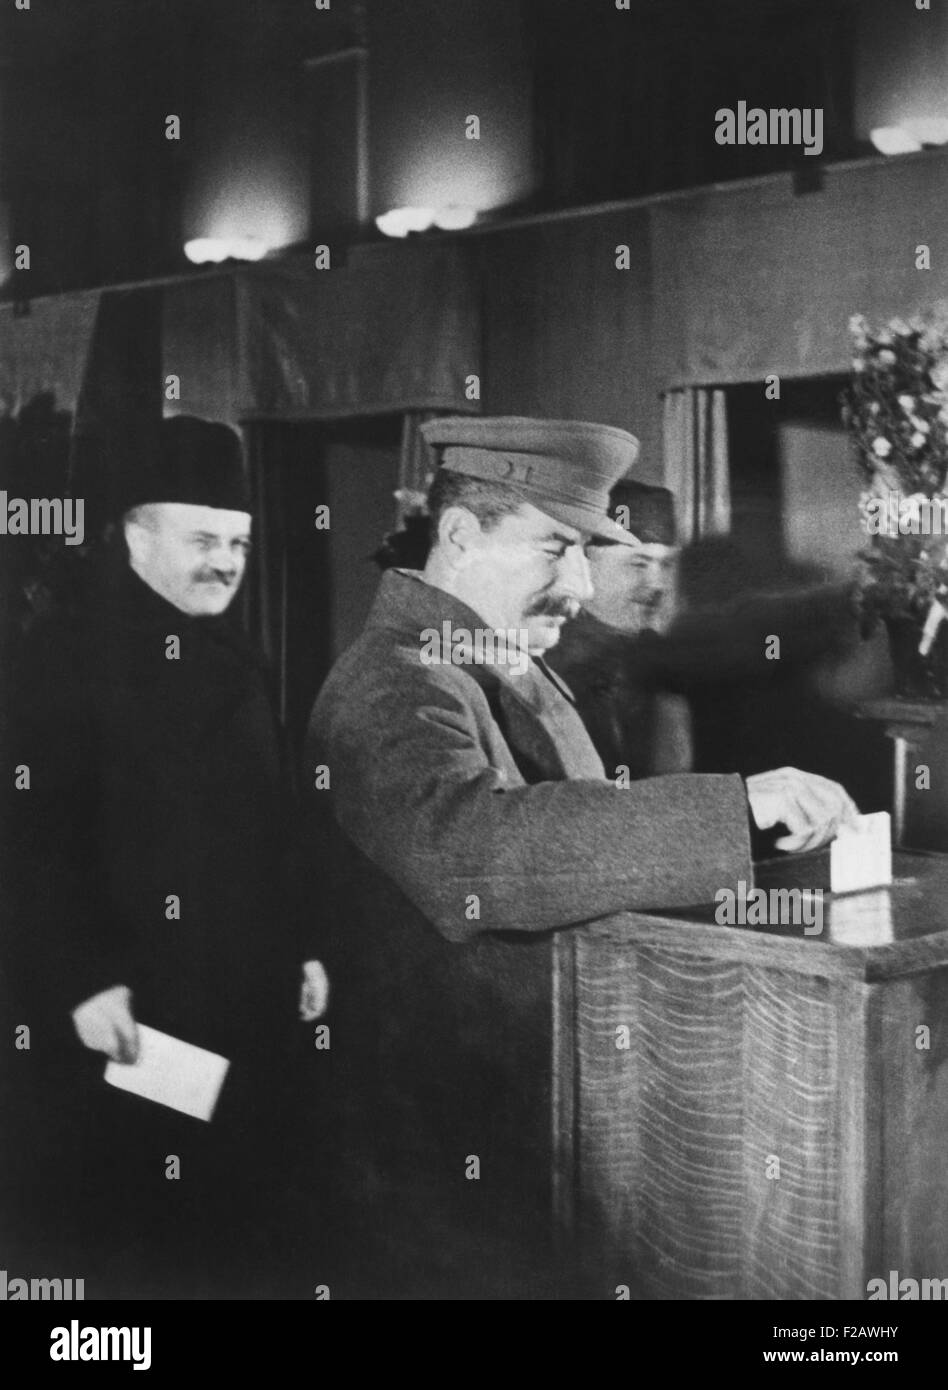 Josef Stalin, voting at an election for members of the Supreme Soviet. Ca. 1940. Behind Stalin is V. Molotov (left), Chairman of the Council of People's Commissars and Commissar of Foreign Affairs, and K. Voroshilov, Commissar for Defense. (CSU 2015 11 1363) Stock Photo